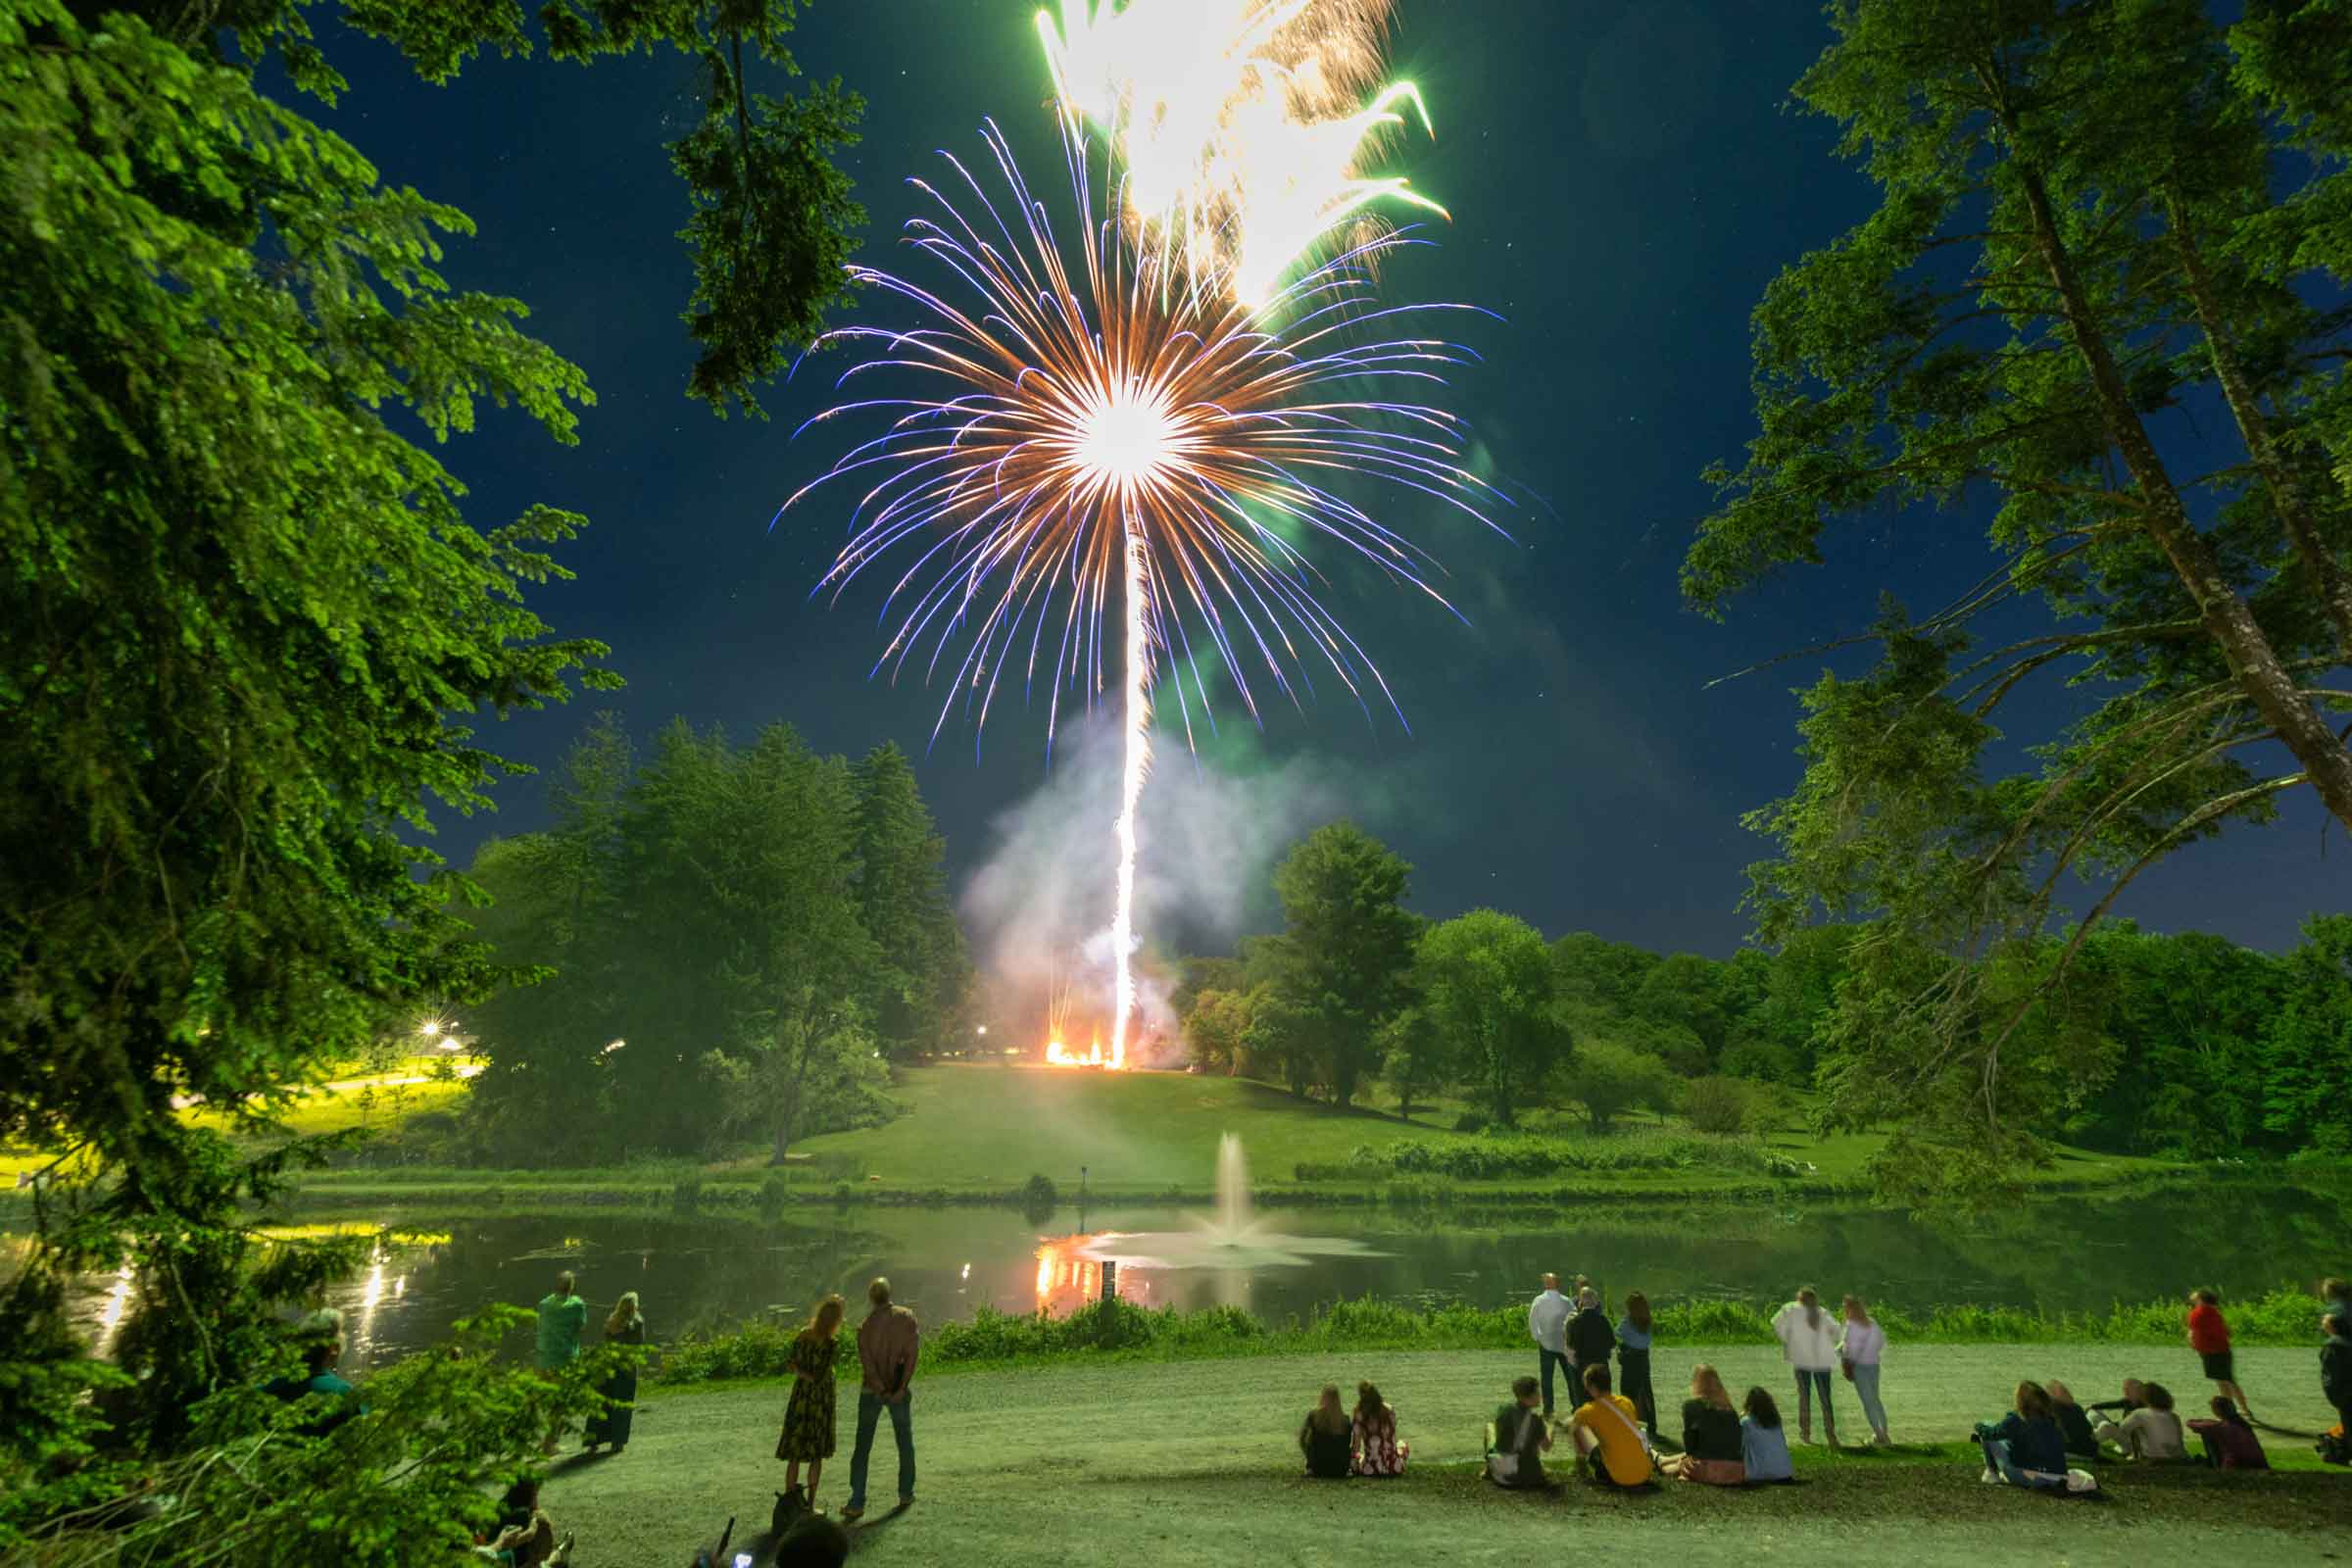 Firework bursting over a lake with onlookers gathered on the shore.